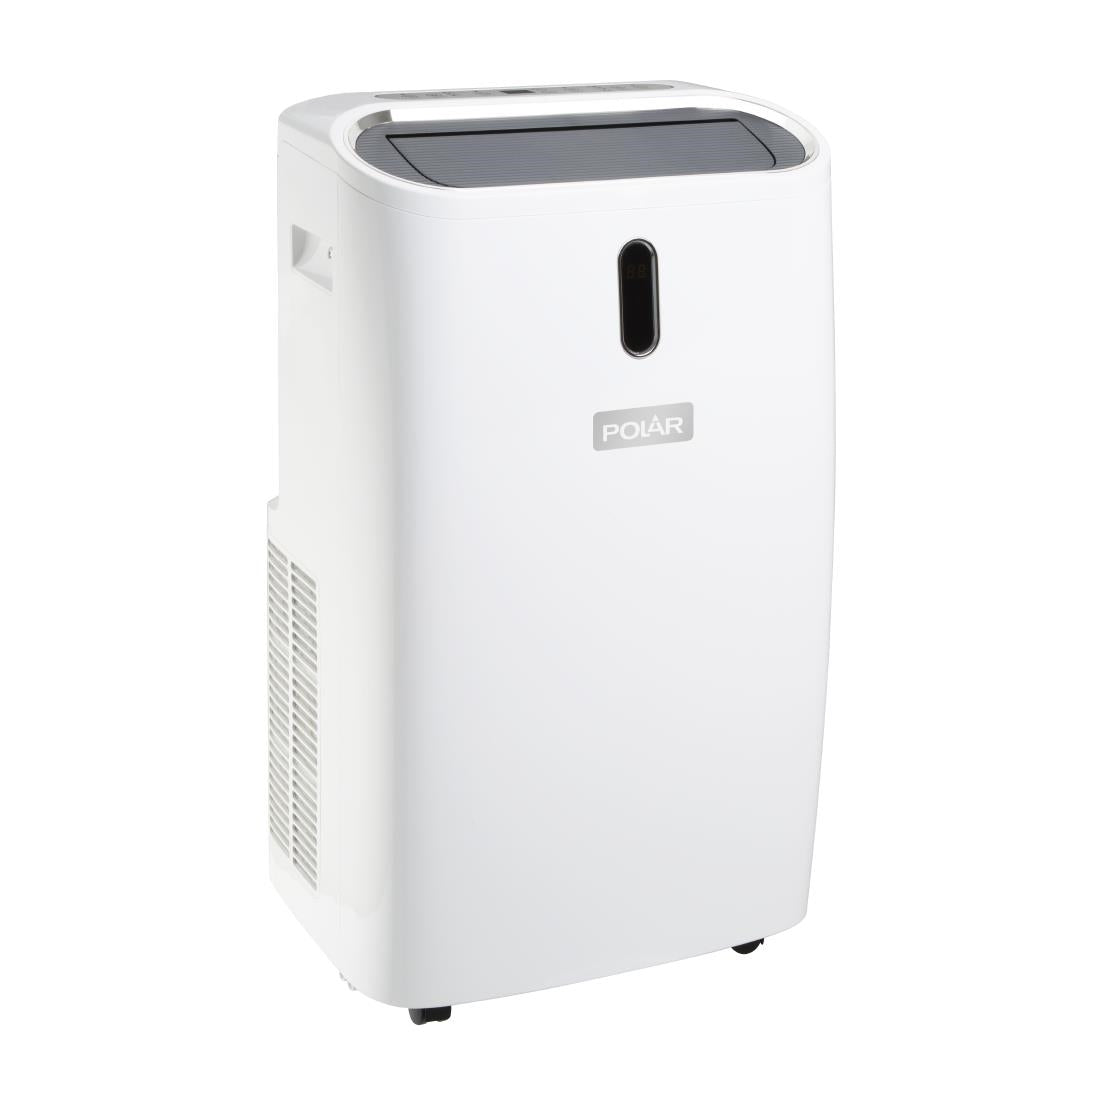 GE959 Polar G-Series Portable Air Conditioner JD Catering Equipment Solutions Ltd